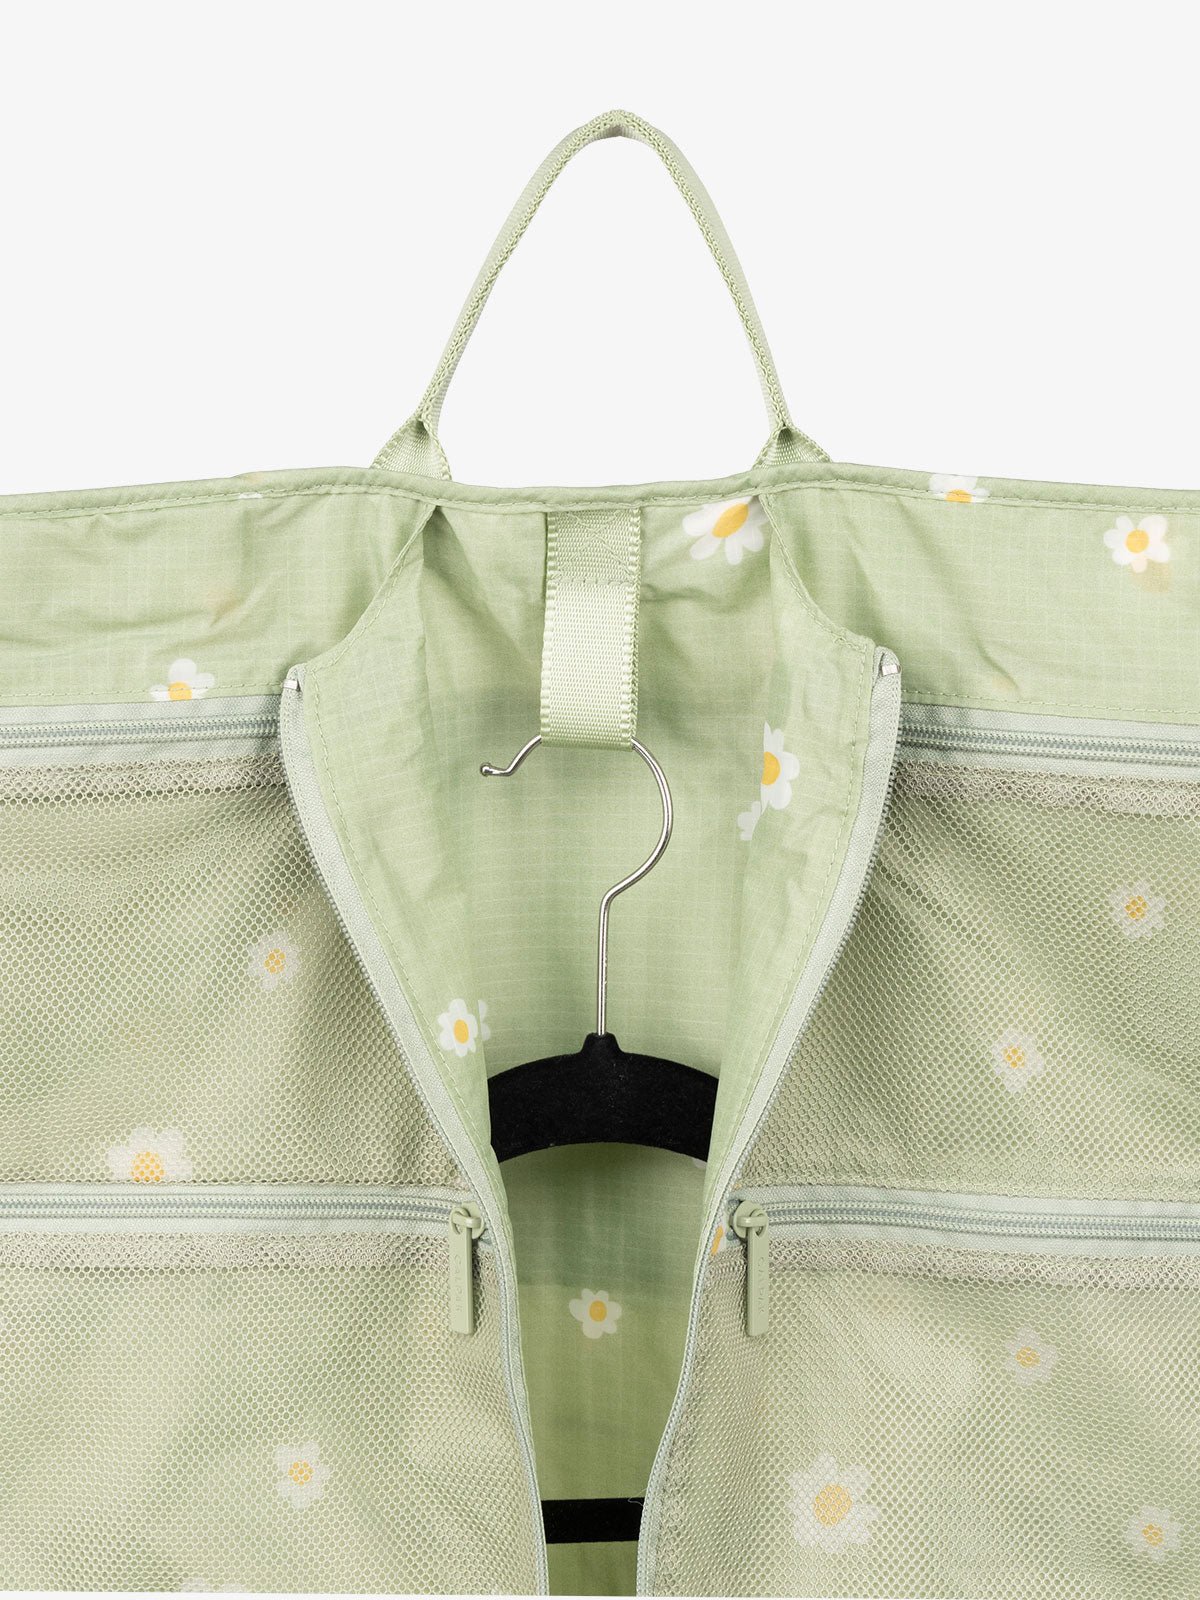 CALPAK Compakt small hanging garment travel bag with handle and mesh pockets in daisy